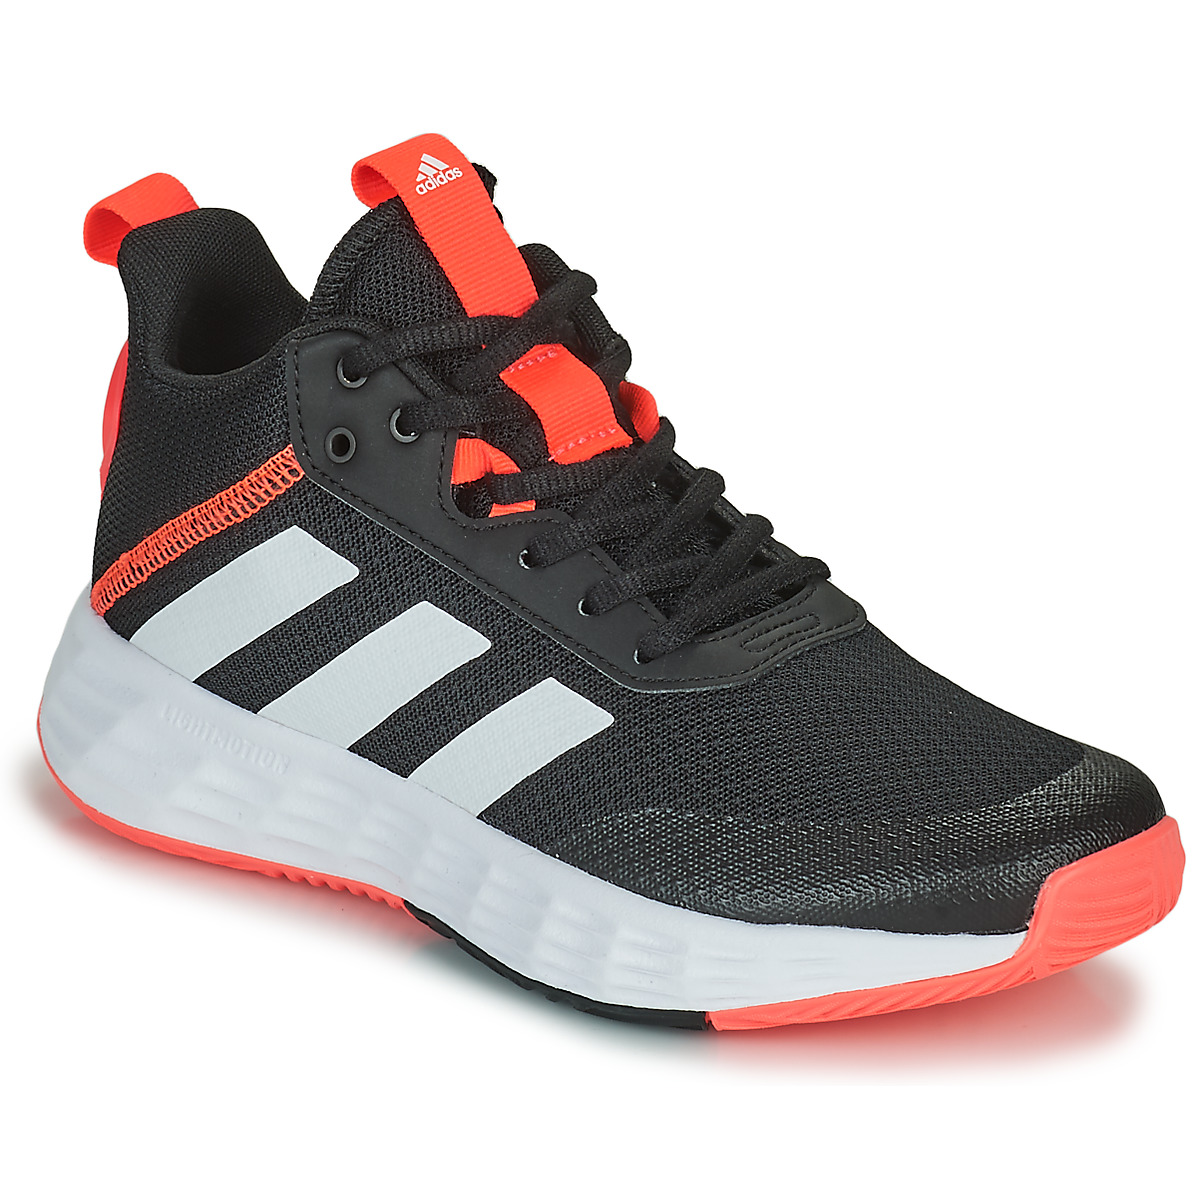 Adidas Sportswear OWNTHEGAME 2.0 K Black / Red - Free delivery | Spartoo  NET ! - Shoes Basketball shoes Child